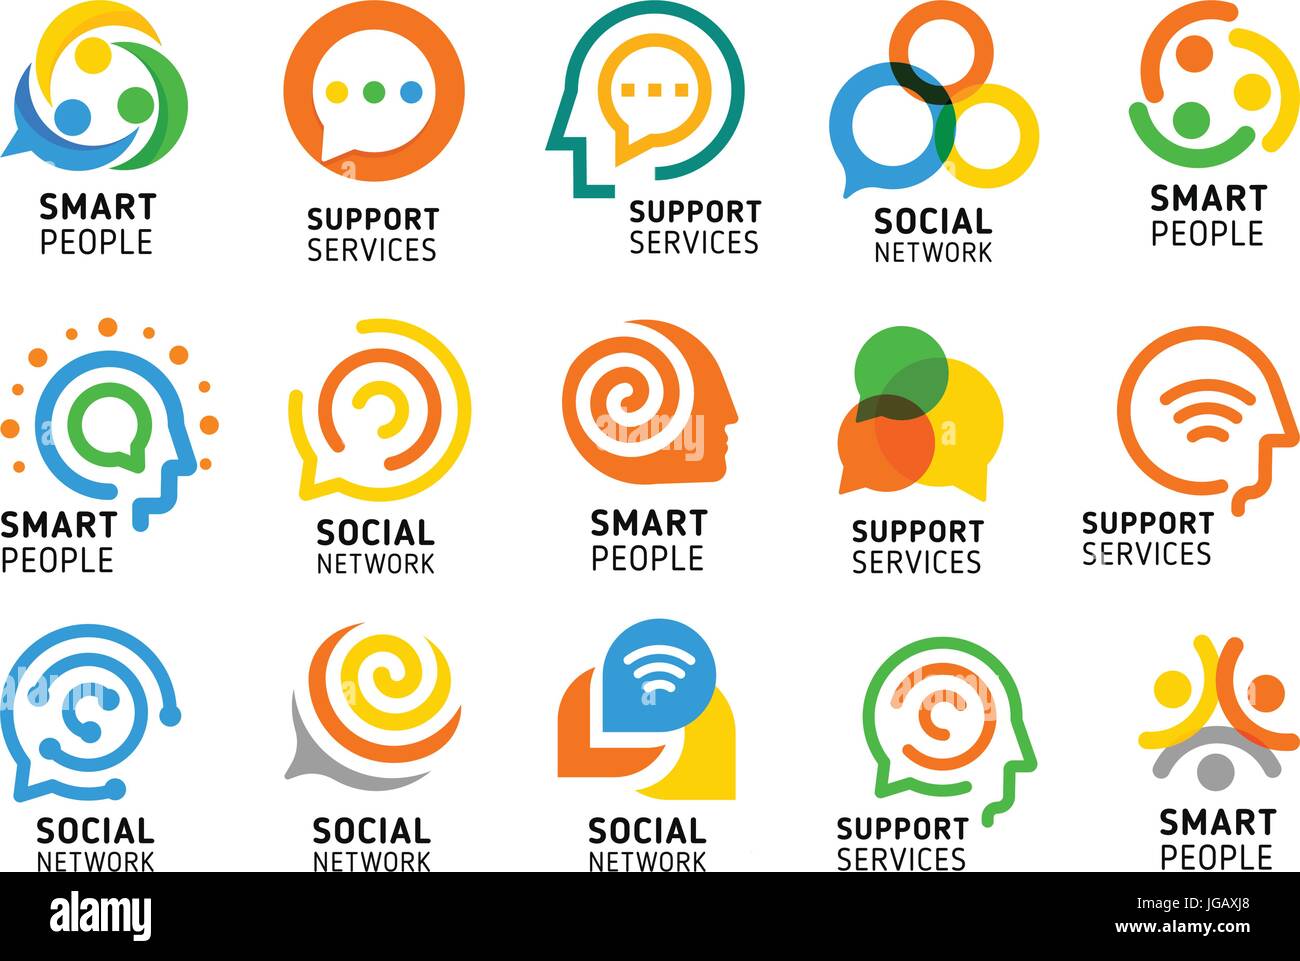 Social network for smart people with creative brain. Support services icon set. Colorful vector logo collection. Stock Vector